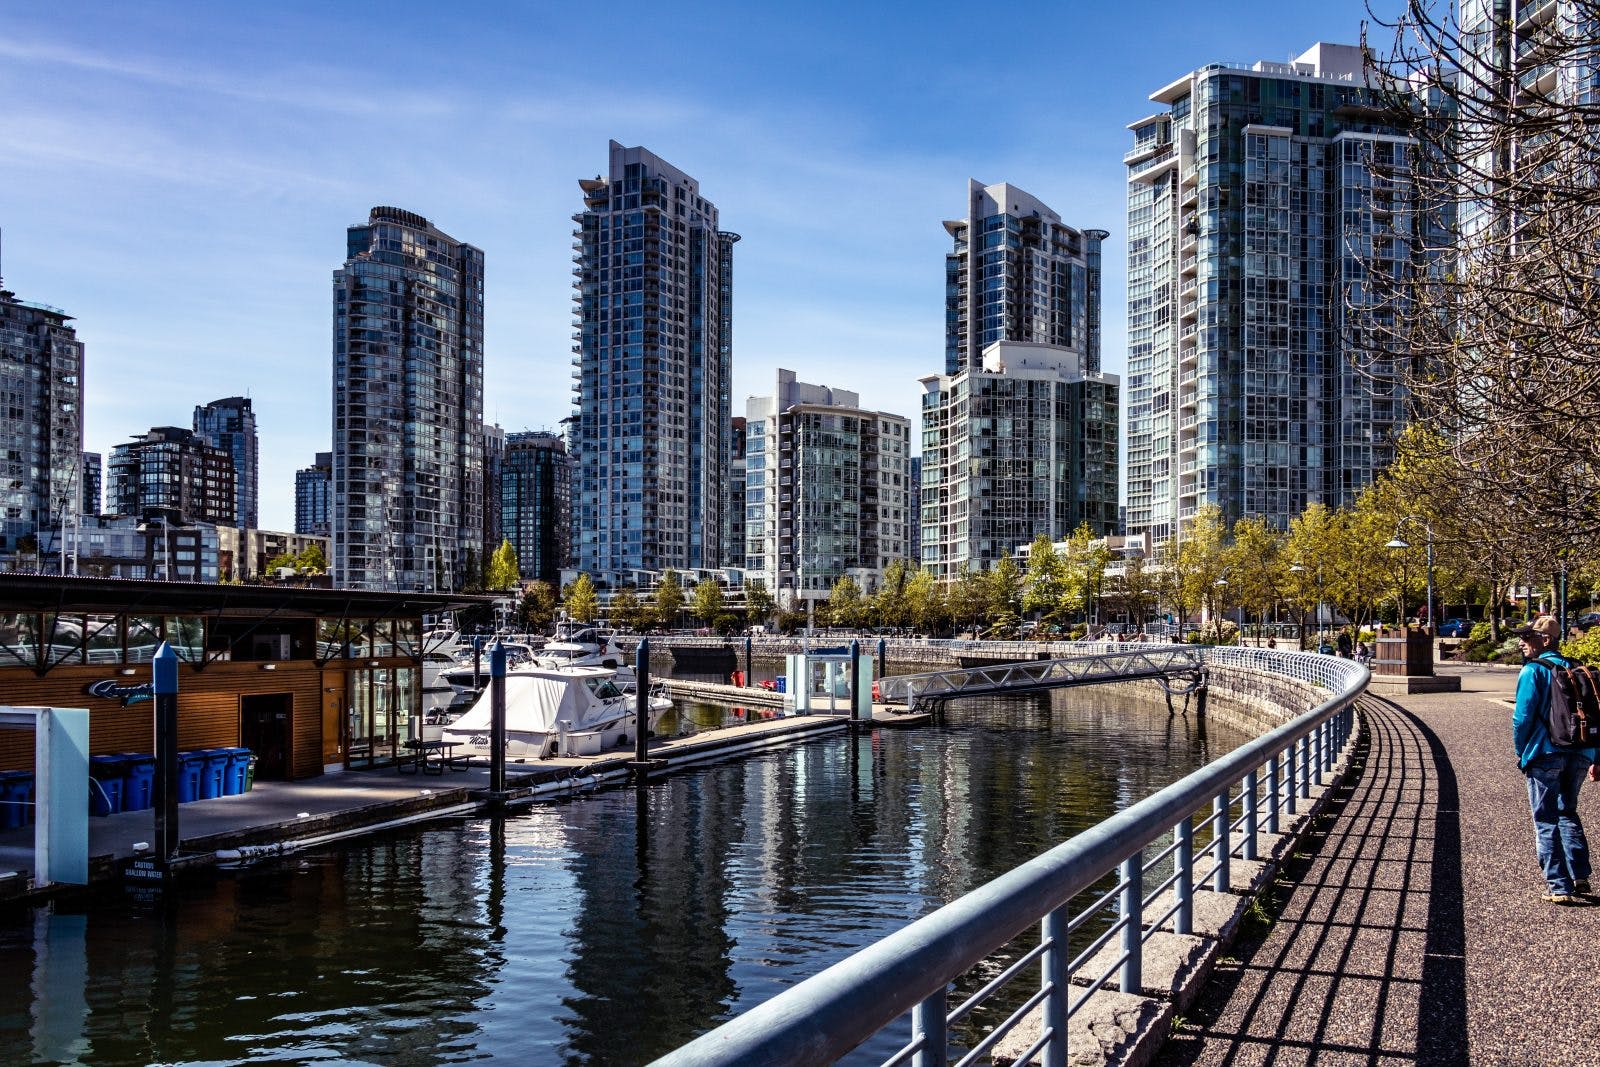 Home buyers guide to Vancouver - Kitsilano and Fairview